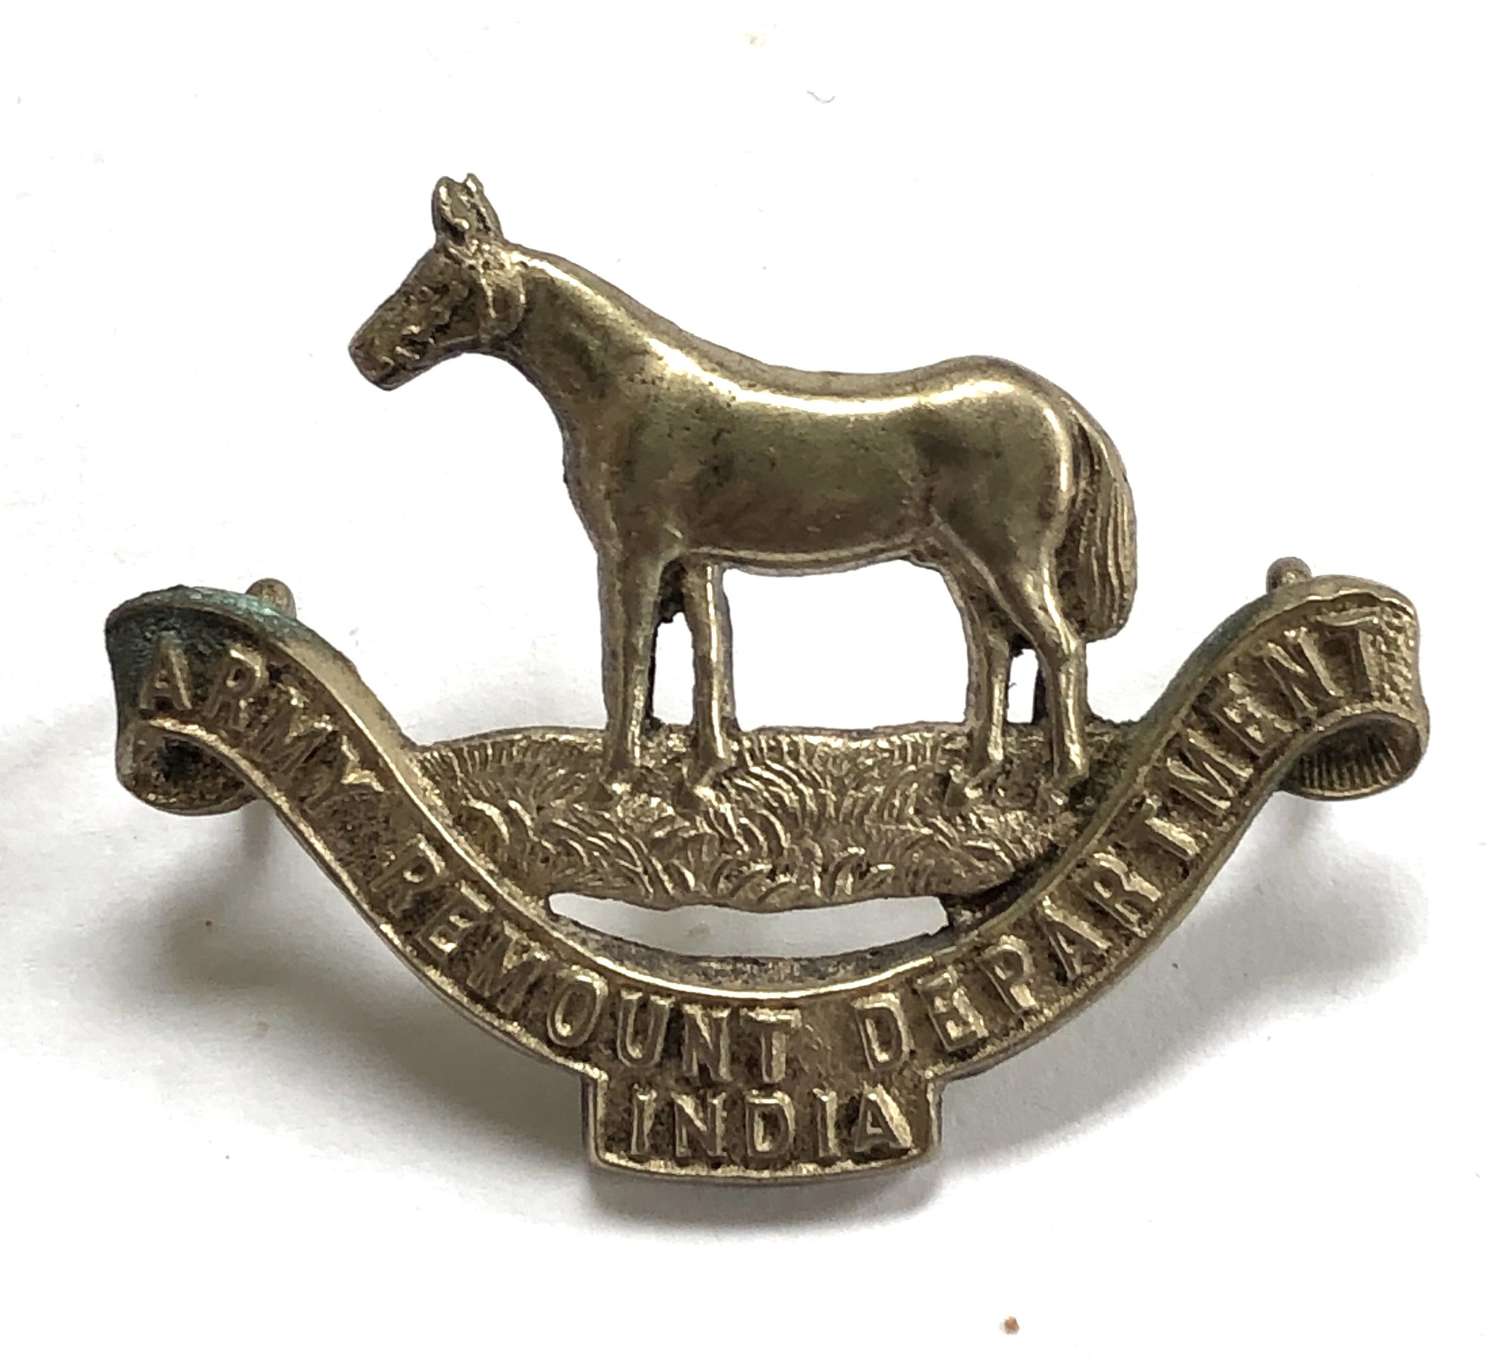 Army Remount Department India Officer’s cap badge by J.R. Gaunt.